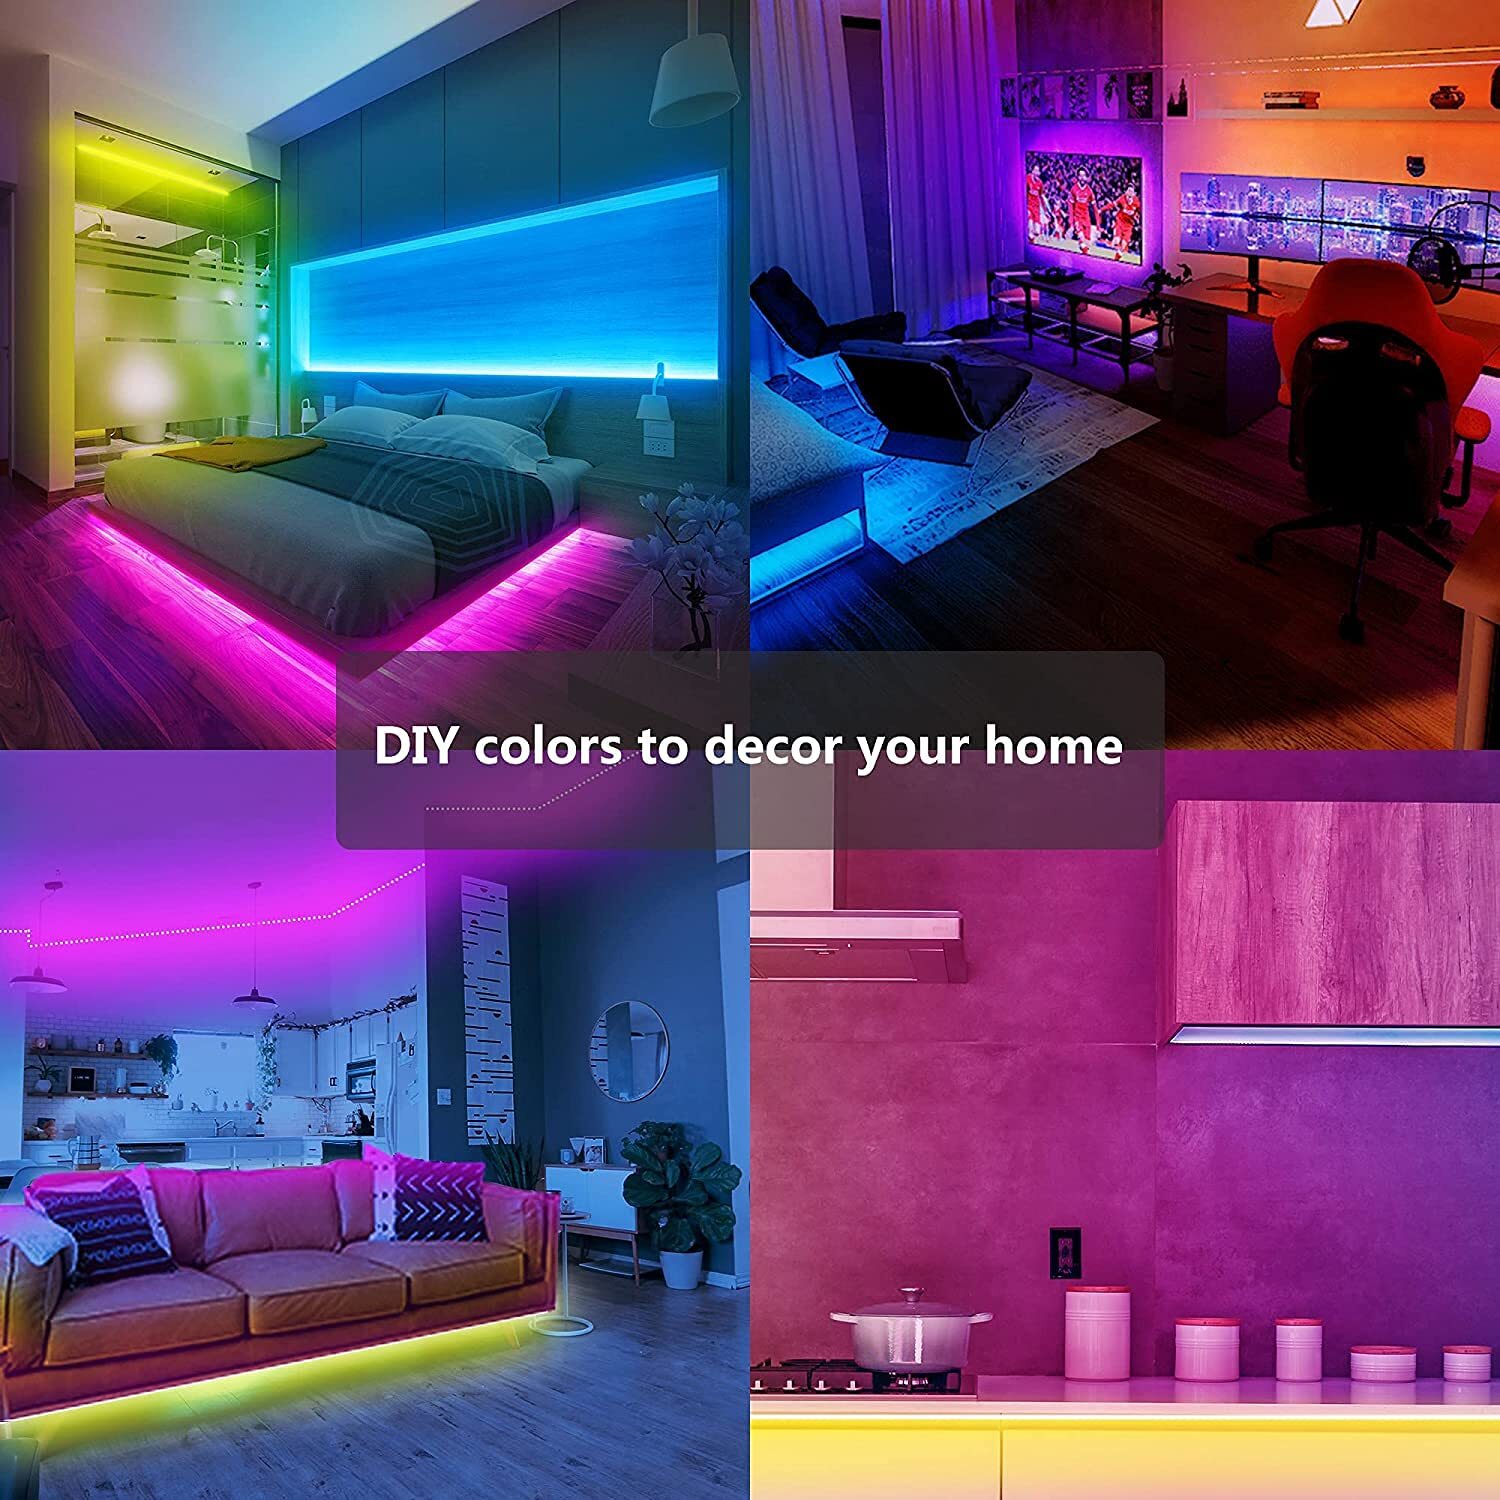 GUPUP 150 feet (about 150 meters) LED light strip, rope light, Bluetooth app control, color changing light strip, light and music synchronization